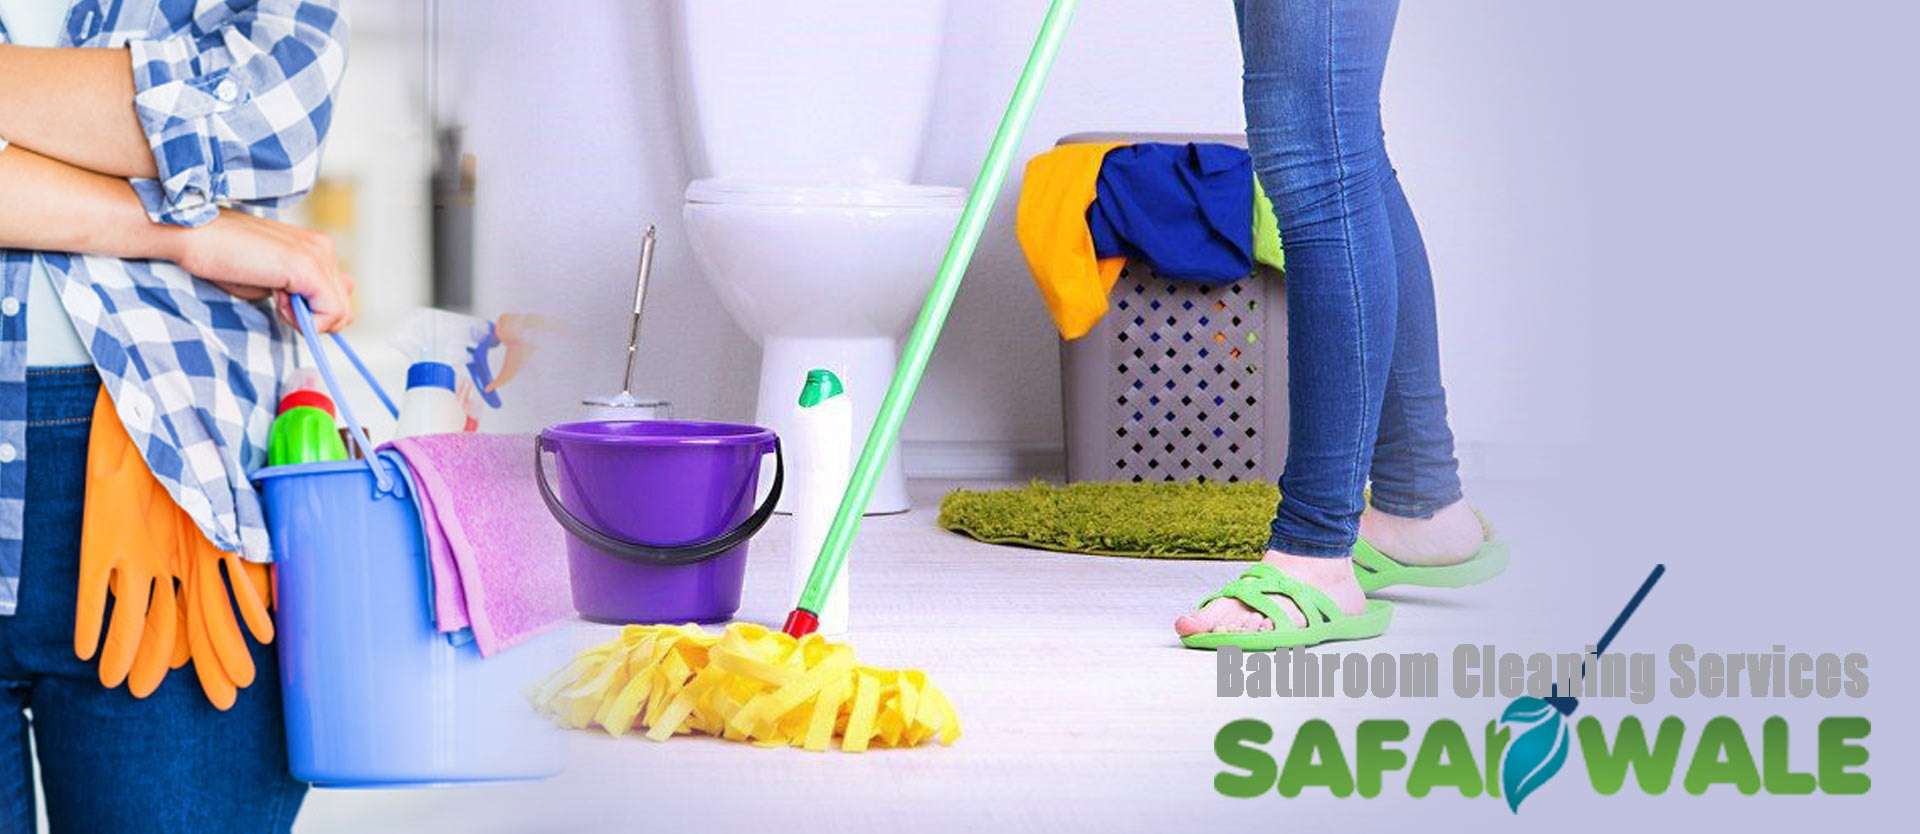 Bathroom Cleaning Services In Wave City